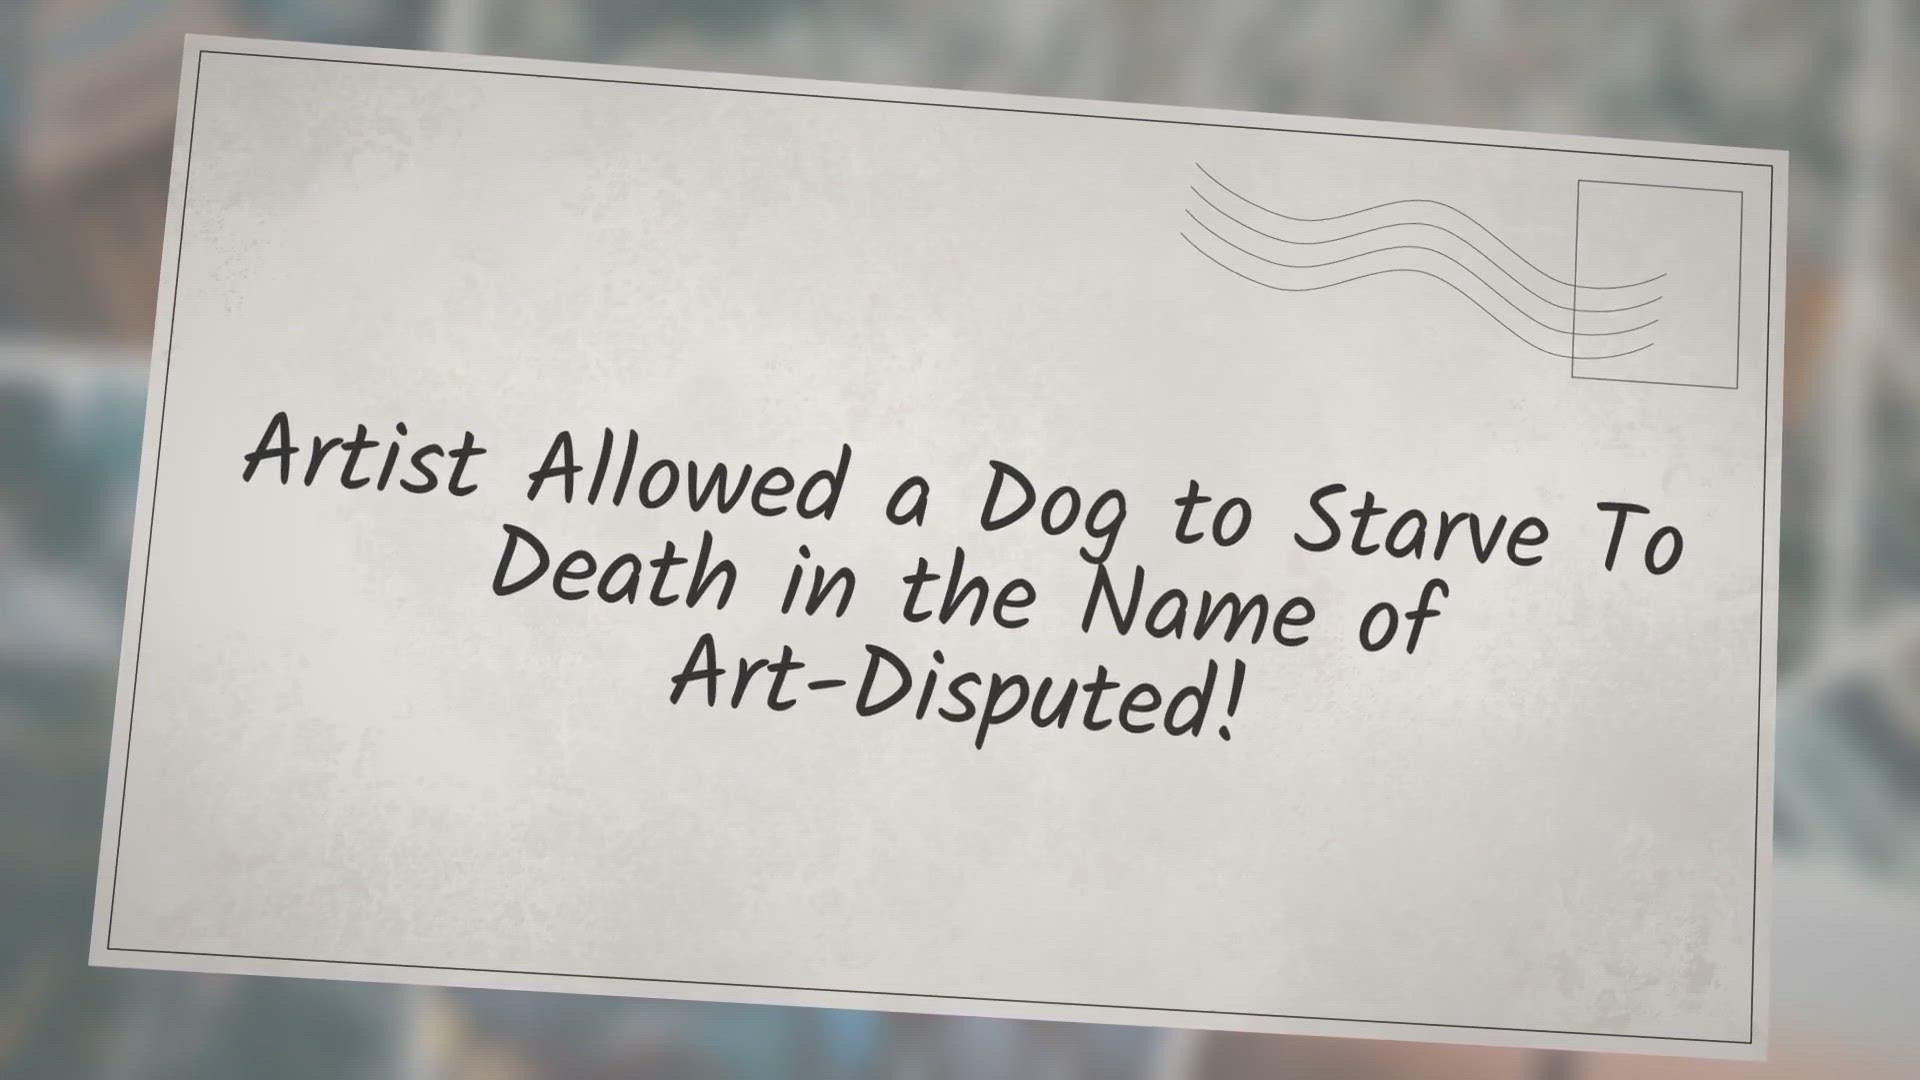 'Video thumbnail for Artist allowed a dog to starve to death in art exhibit-Disputed!'